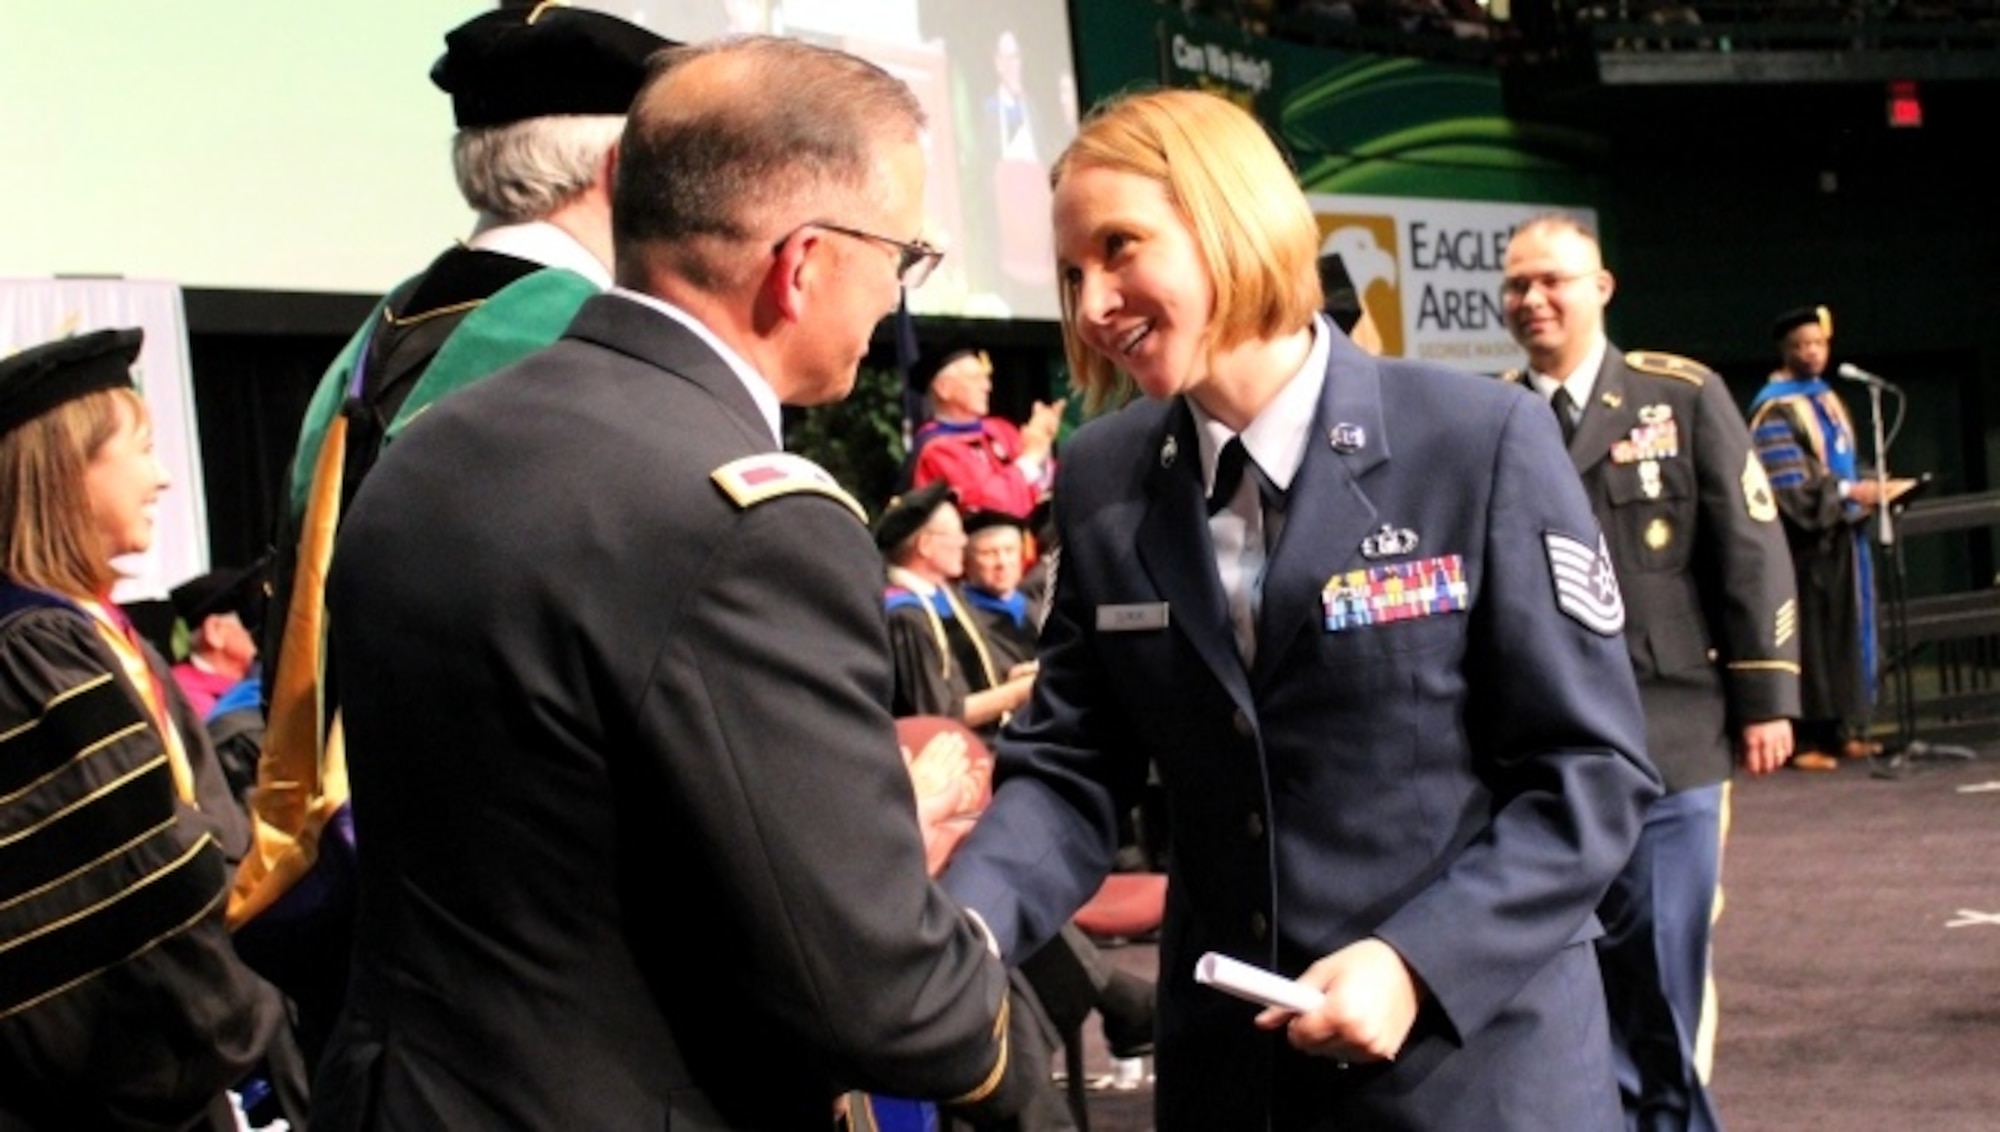 Tech. Sgt. Lindsay Slimski, the first and only female member of the Enlisted to Medical Degree Preparatory Program, crosses the stage at a commencement ceremony held at George Mason University on May 11, 2016, as she graduates from the Enlisted to Medical Degree Preparatory Program. The Enlisted to Medical Degree Preparatory Program is a partnership between the Armed Services and Uniformed Services University. Designed for enlisted service members, the two-year program enables members to remain on active duty status while enrolled as full-time students in preparation for application to medical school. (U.S. Air Force photo by Prerana Korpe, AFMS Public Affairs)